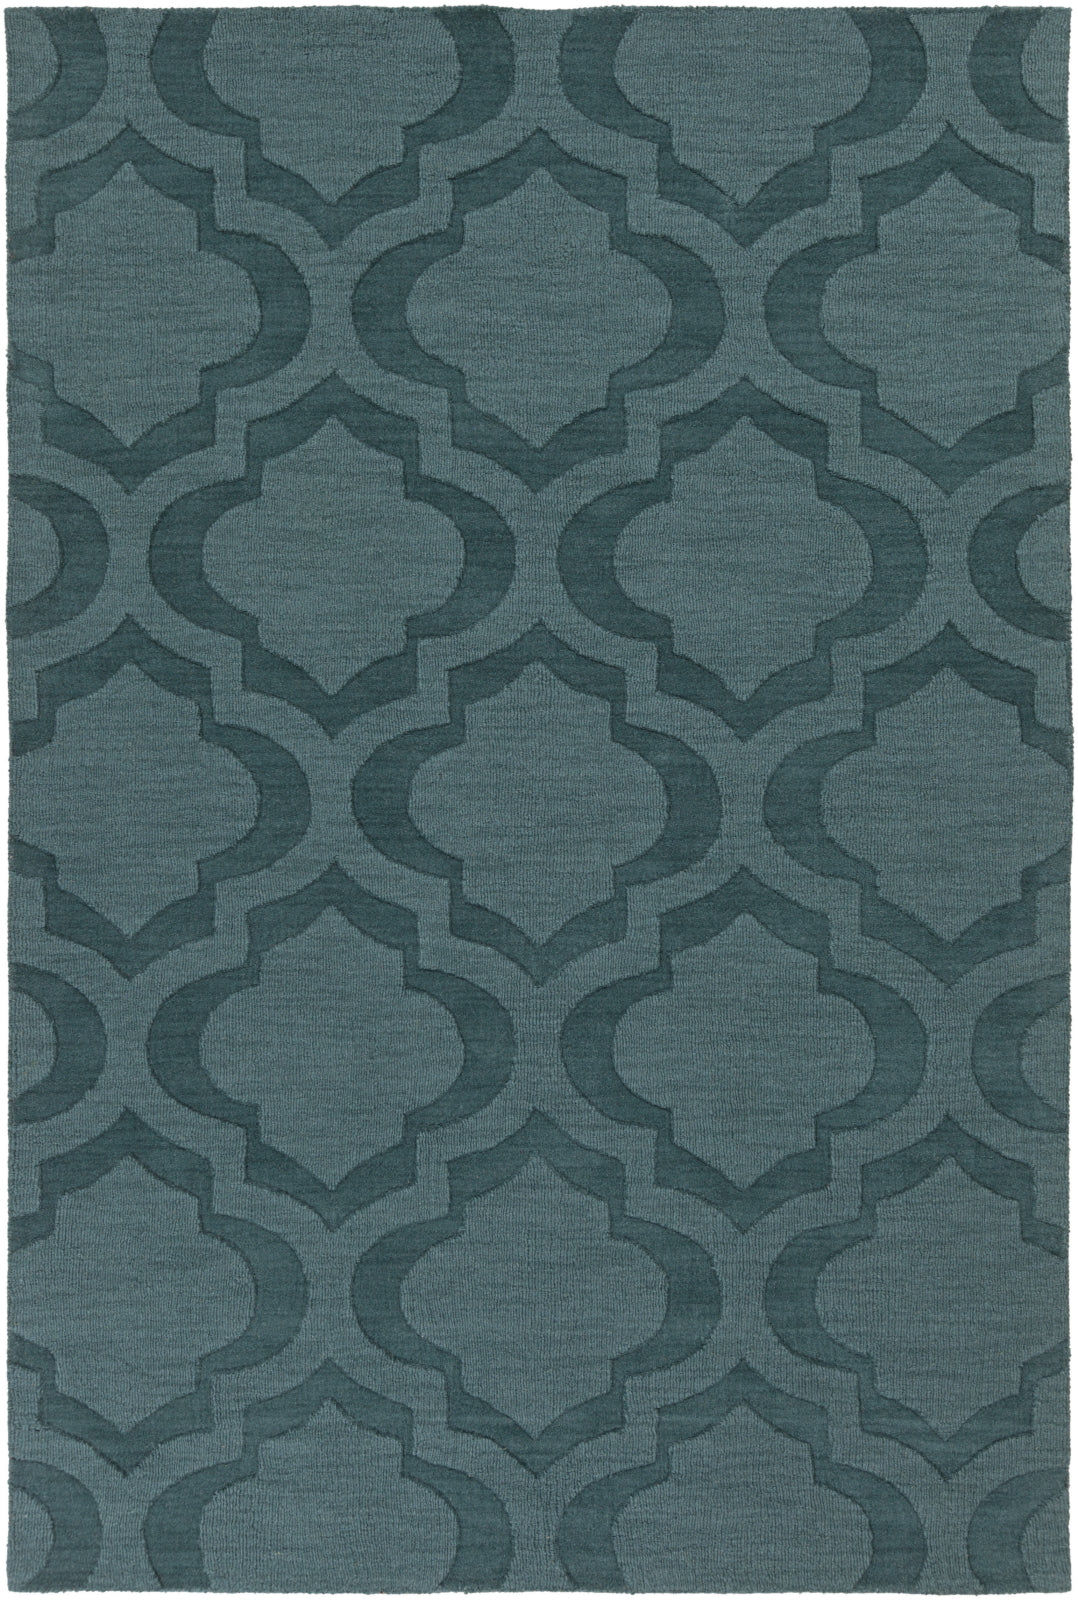 Artistic Weavers Central Park Kate AWHP4010 Area Rug main image